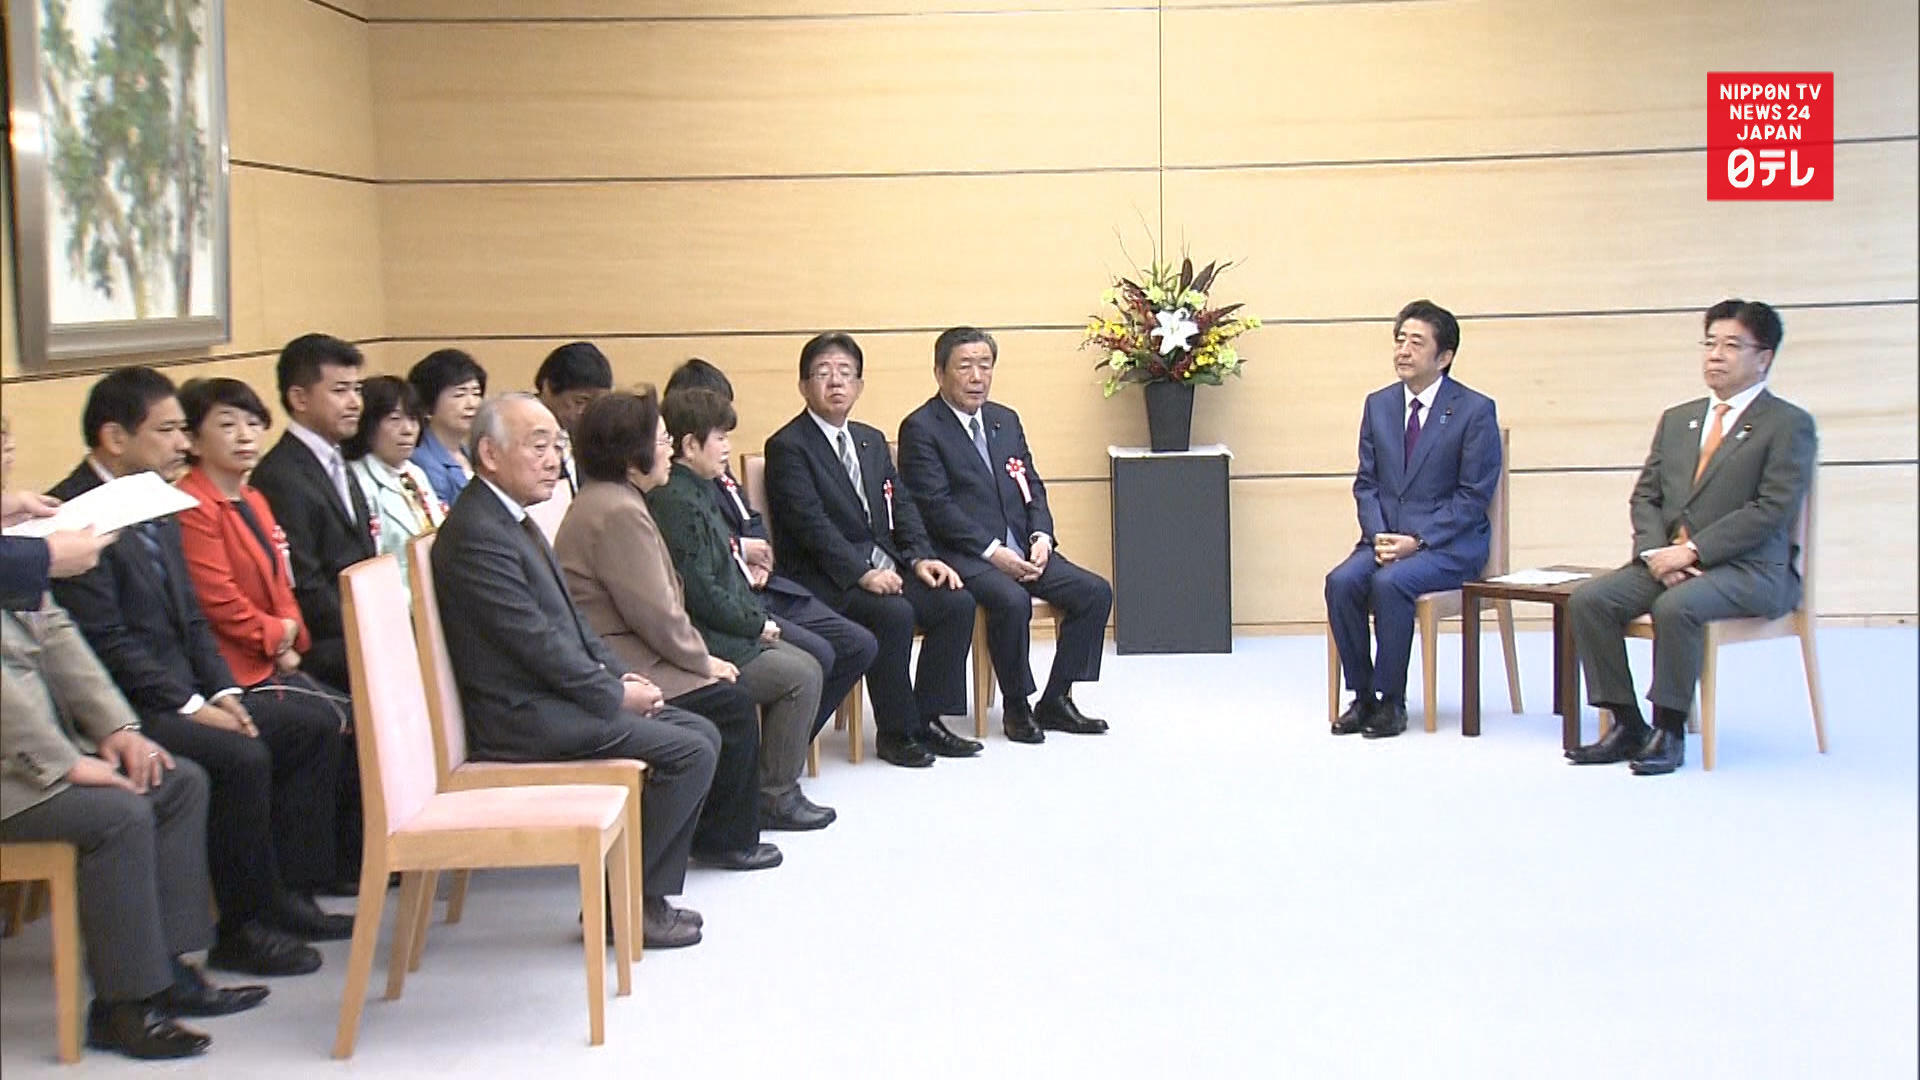 PM Abe meets with families of former leprosy patients